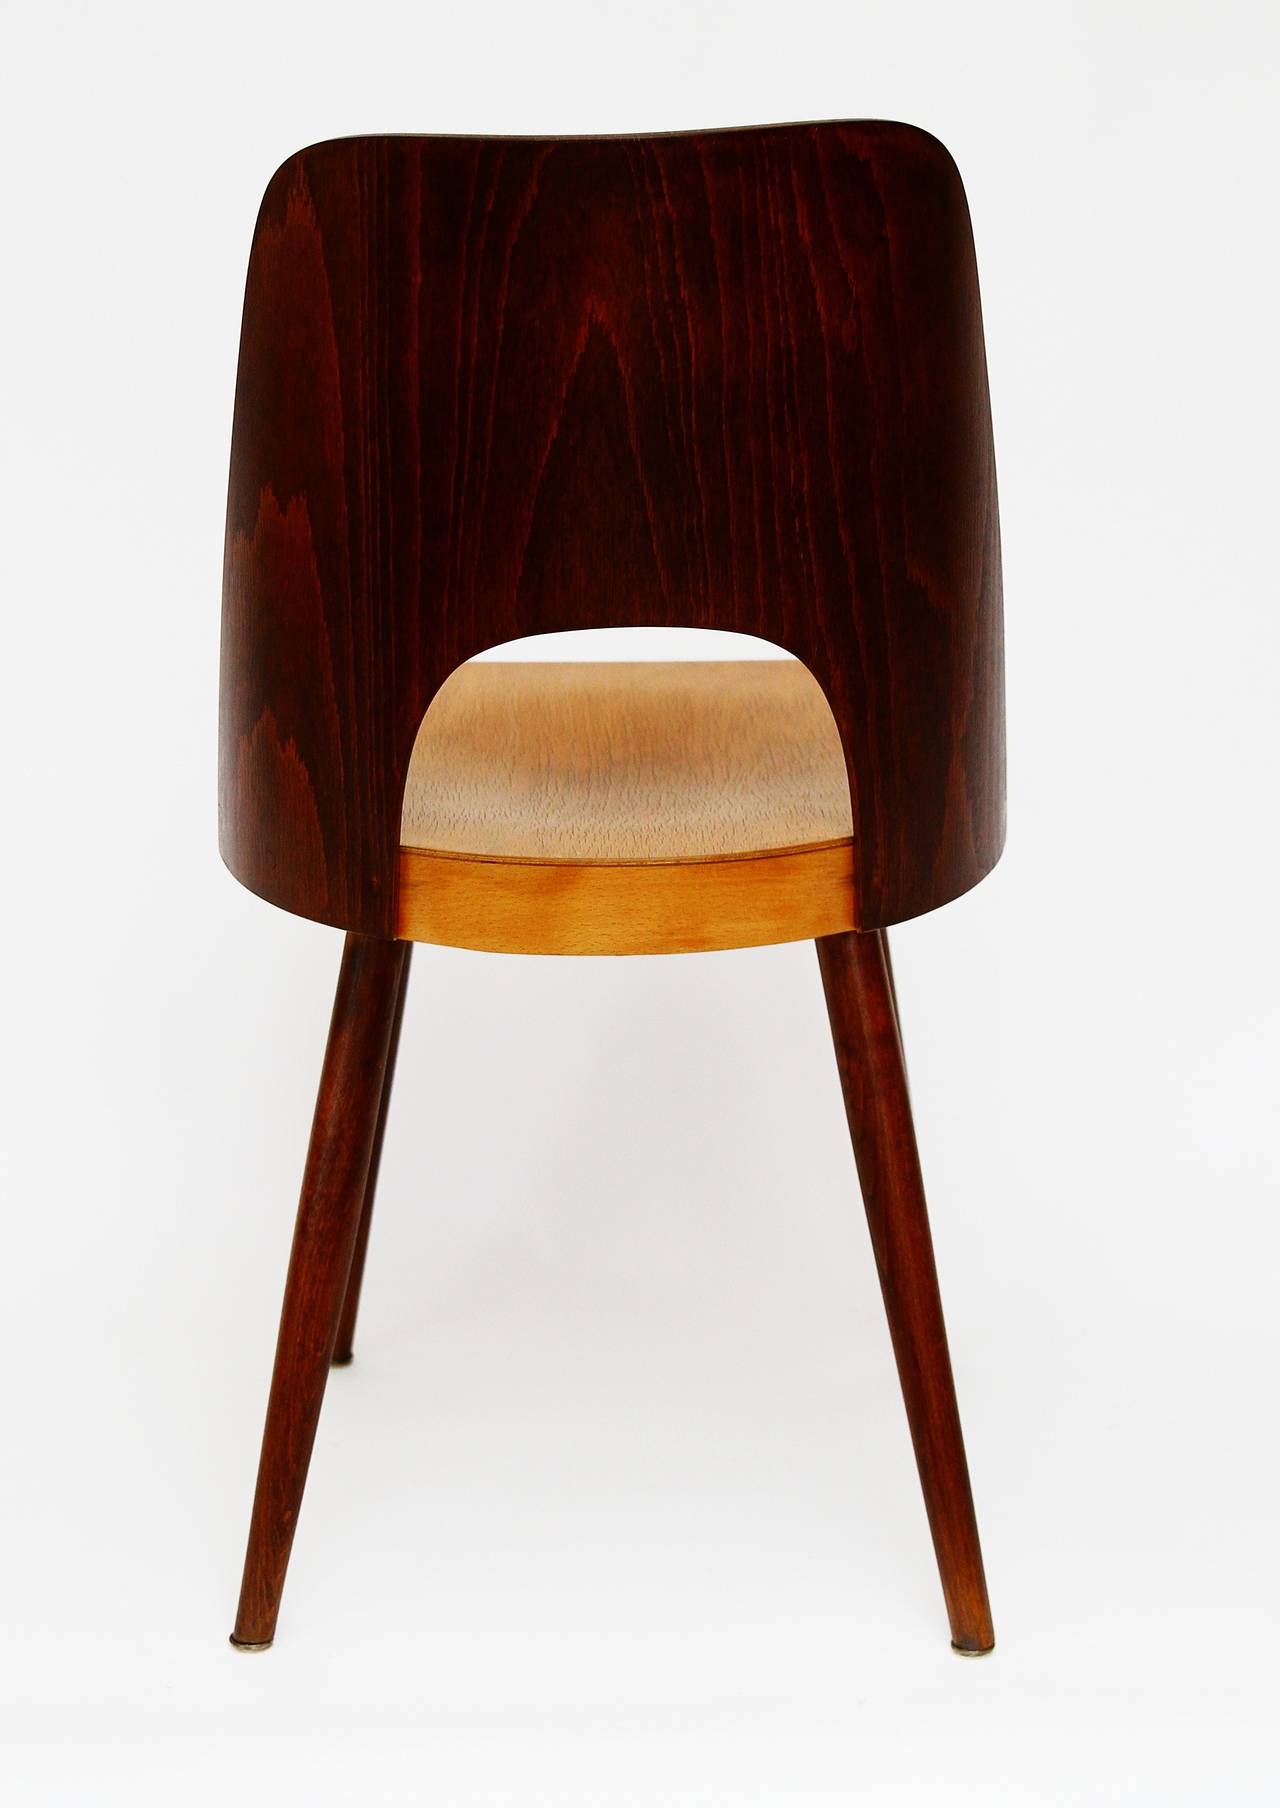 Austrian Viennese Bicolored Chair in Beech by Oswald Haerdtl for Thonet, 1950s